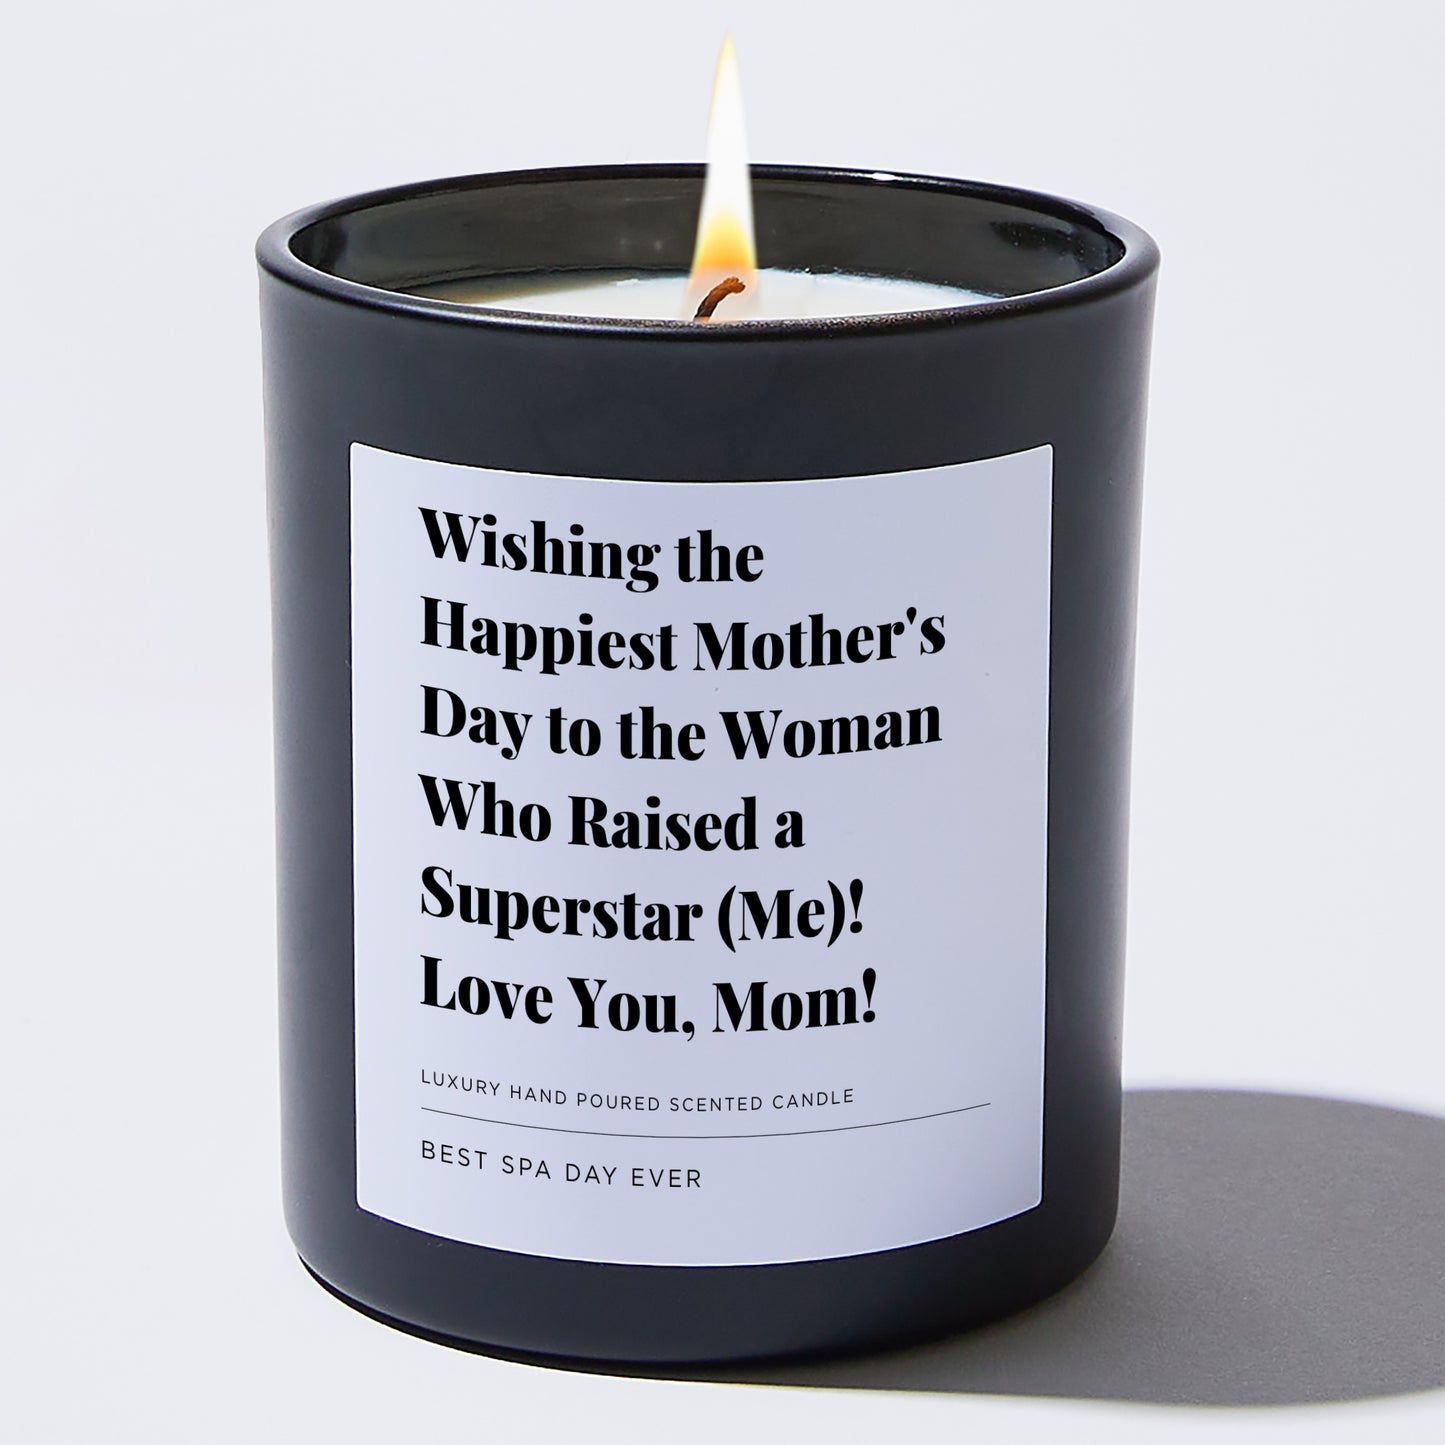 Gift for Mom - Wishing the happiest Mother's Day to the woman who raised a superstar (me)! Love you, Mom! - Candle